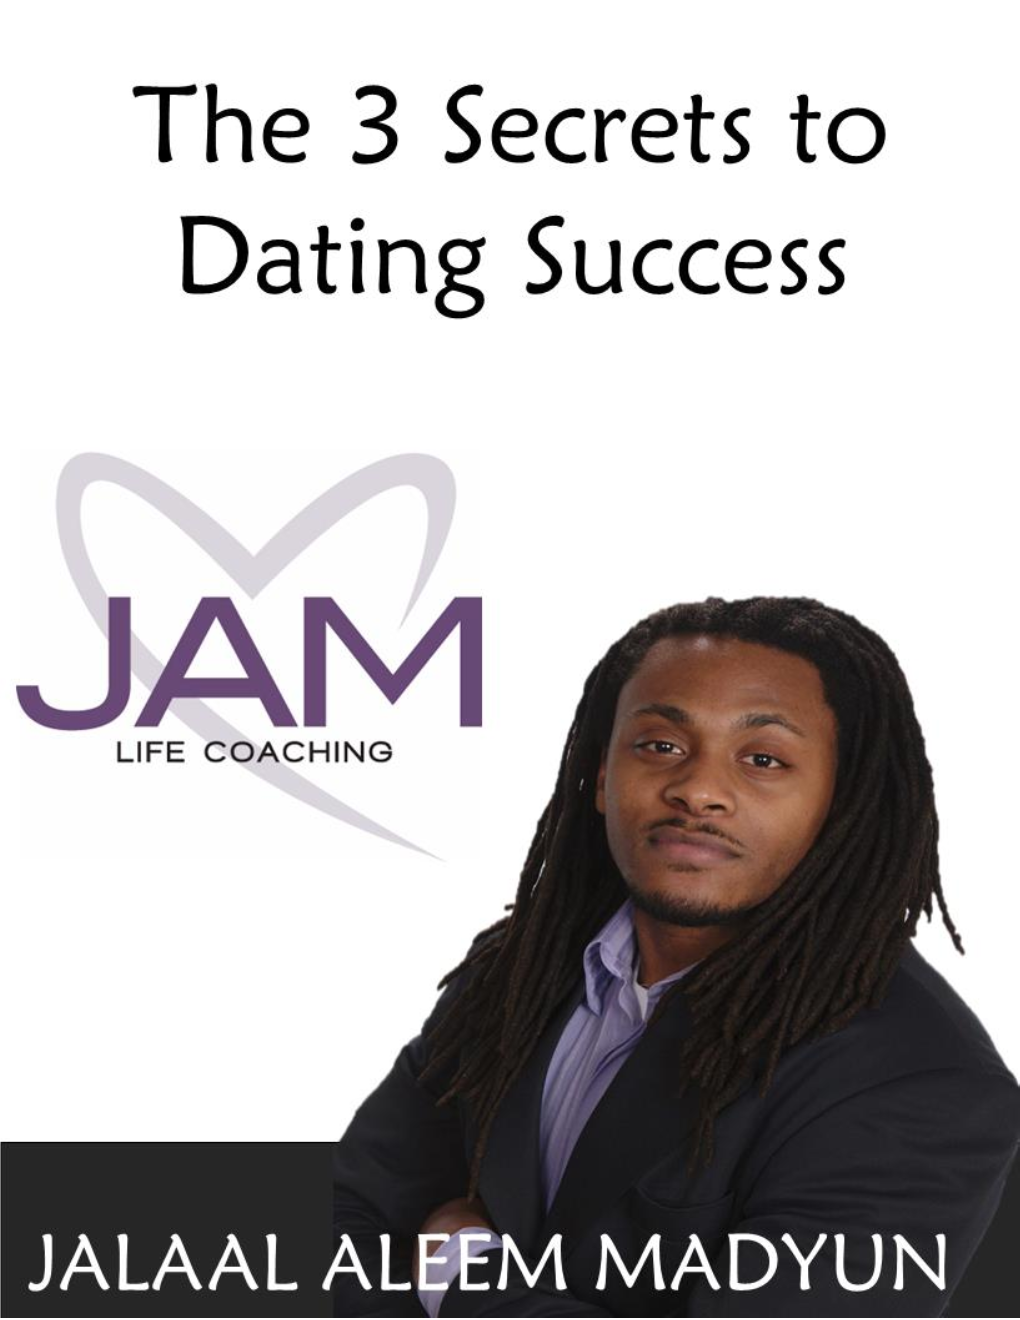 The 3 secrets to Dating Success